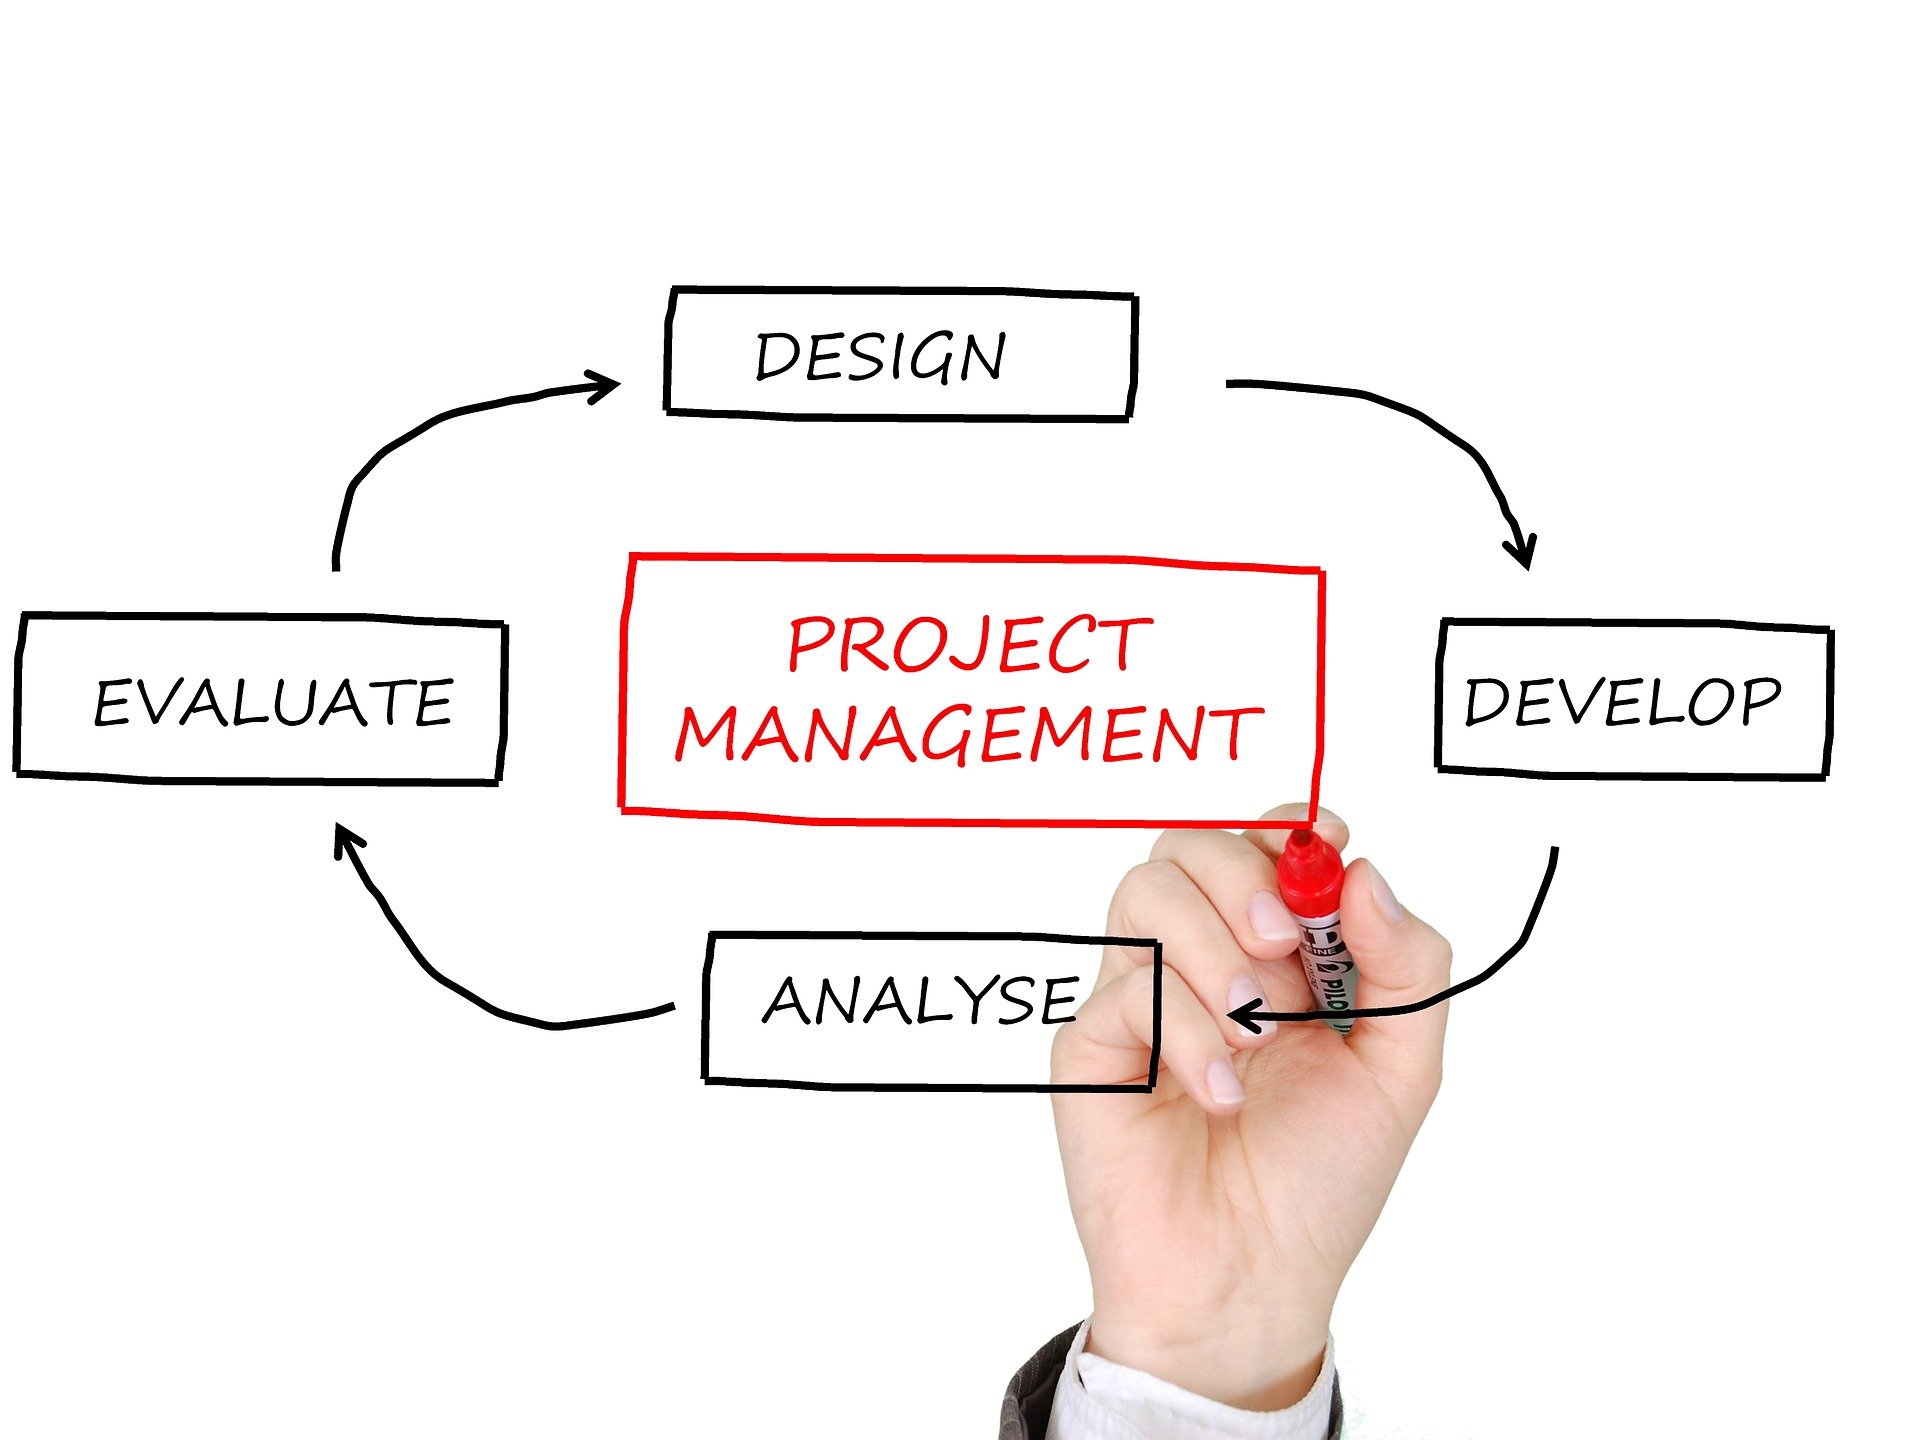 How to get certified in Project Management